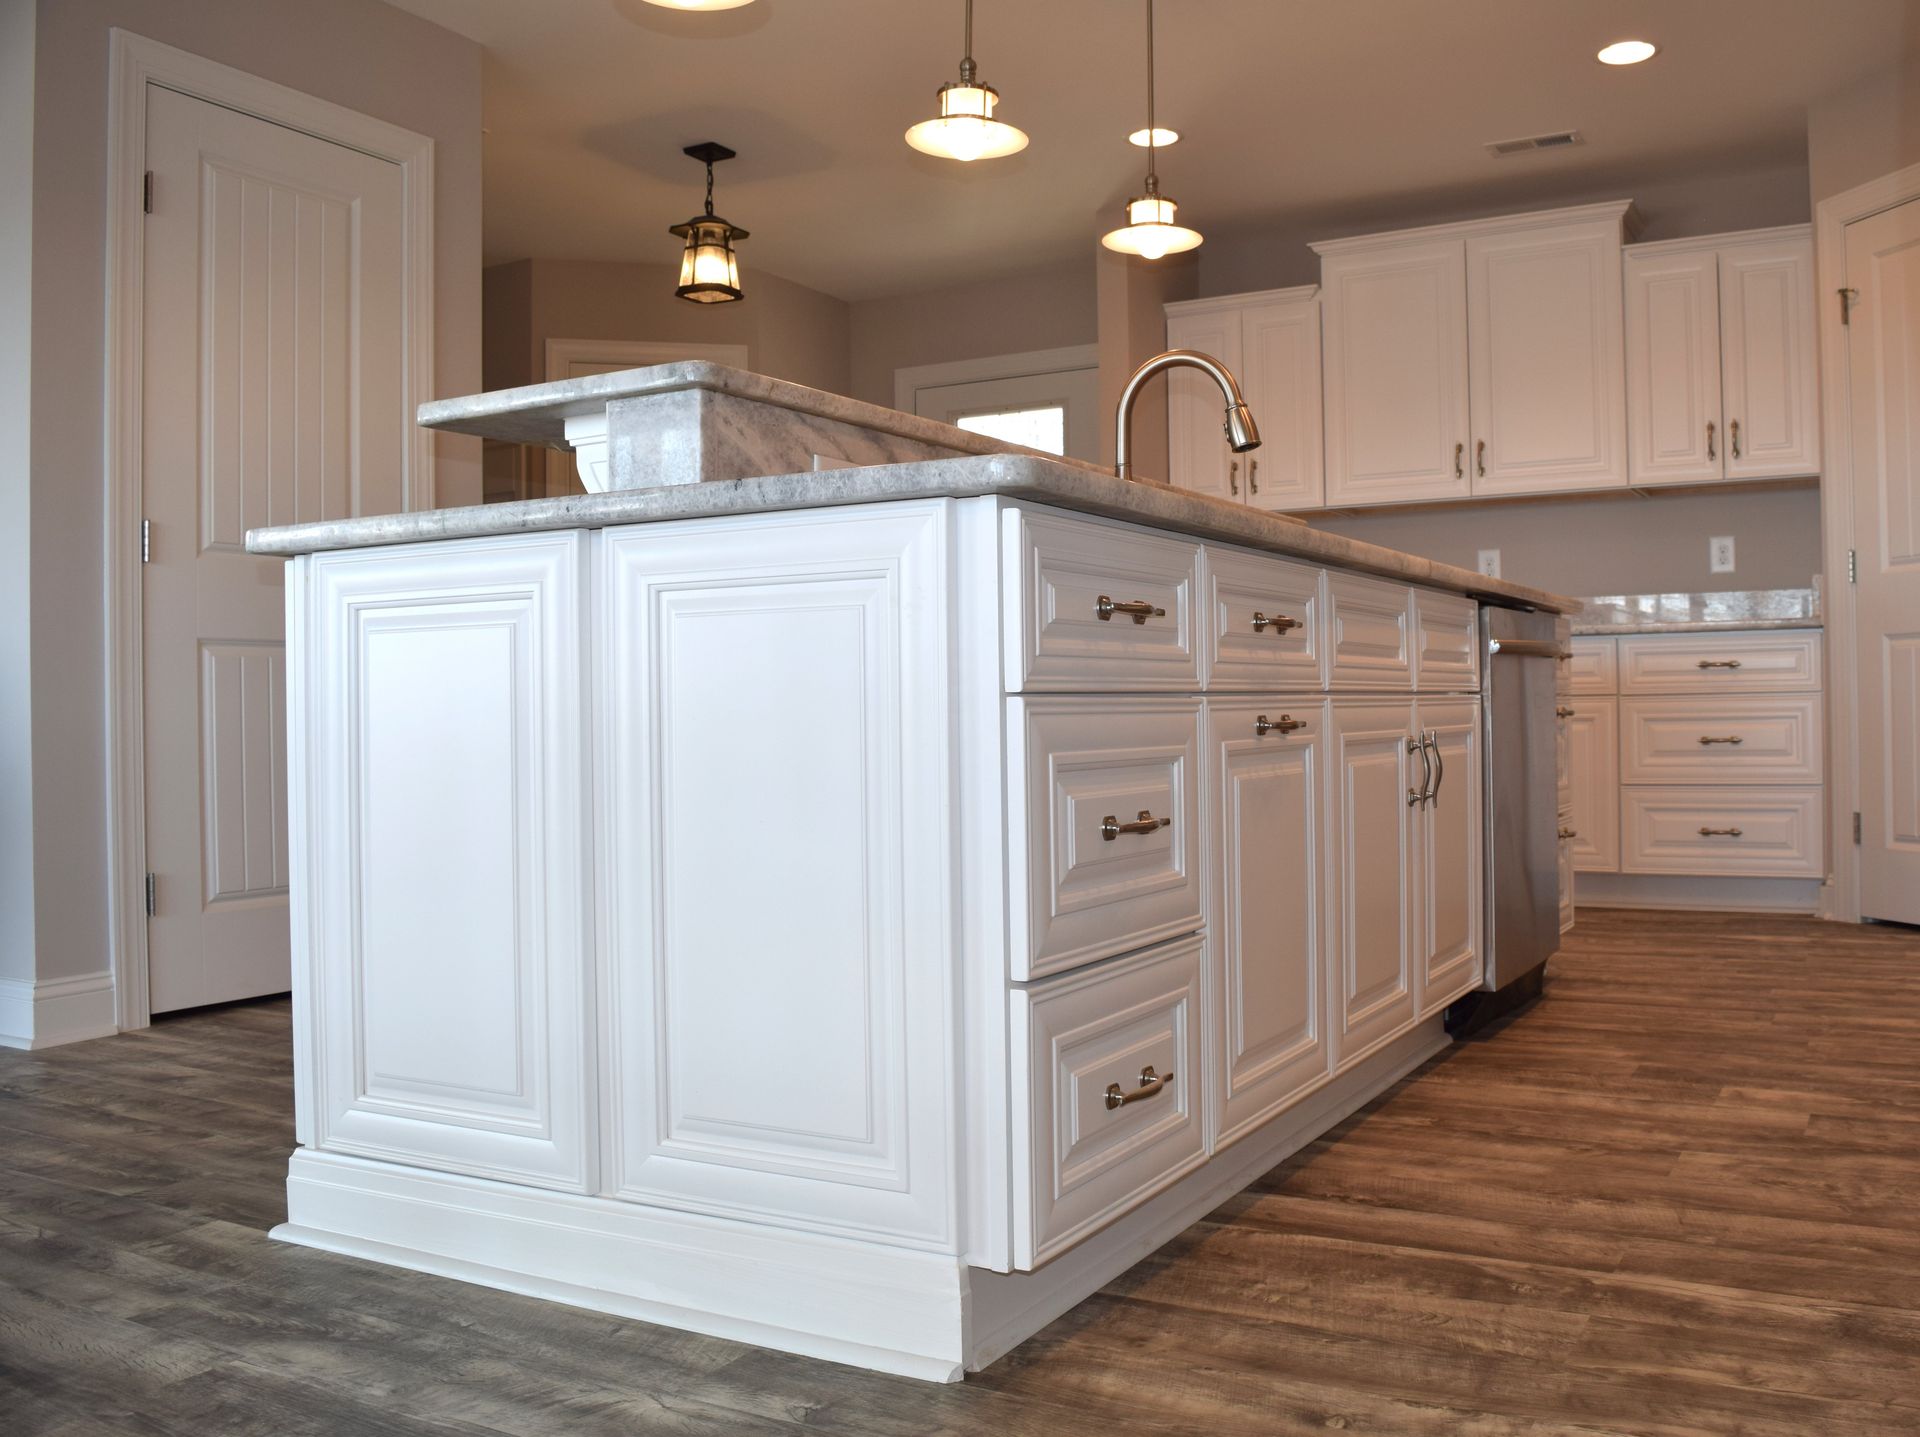 national kitchen and bath cabinetry inc warehouse